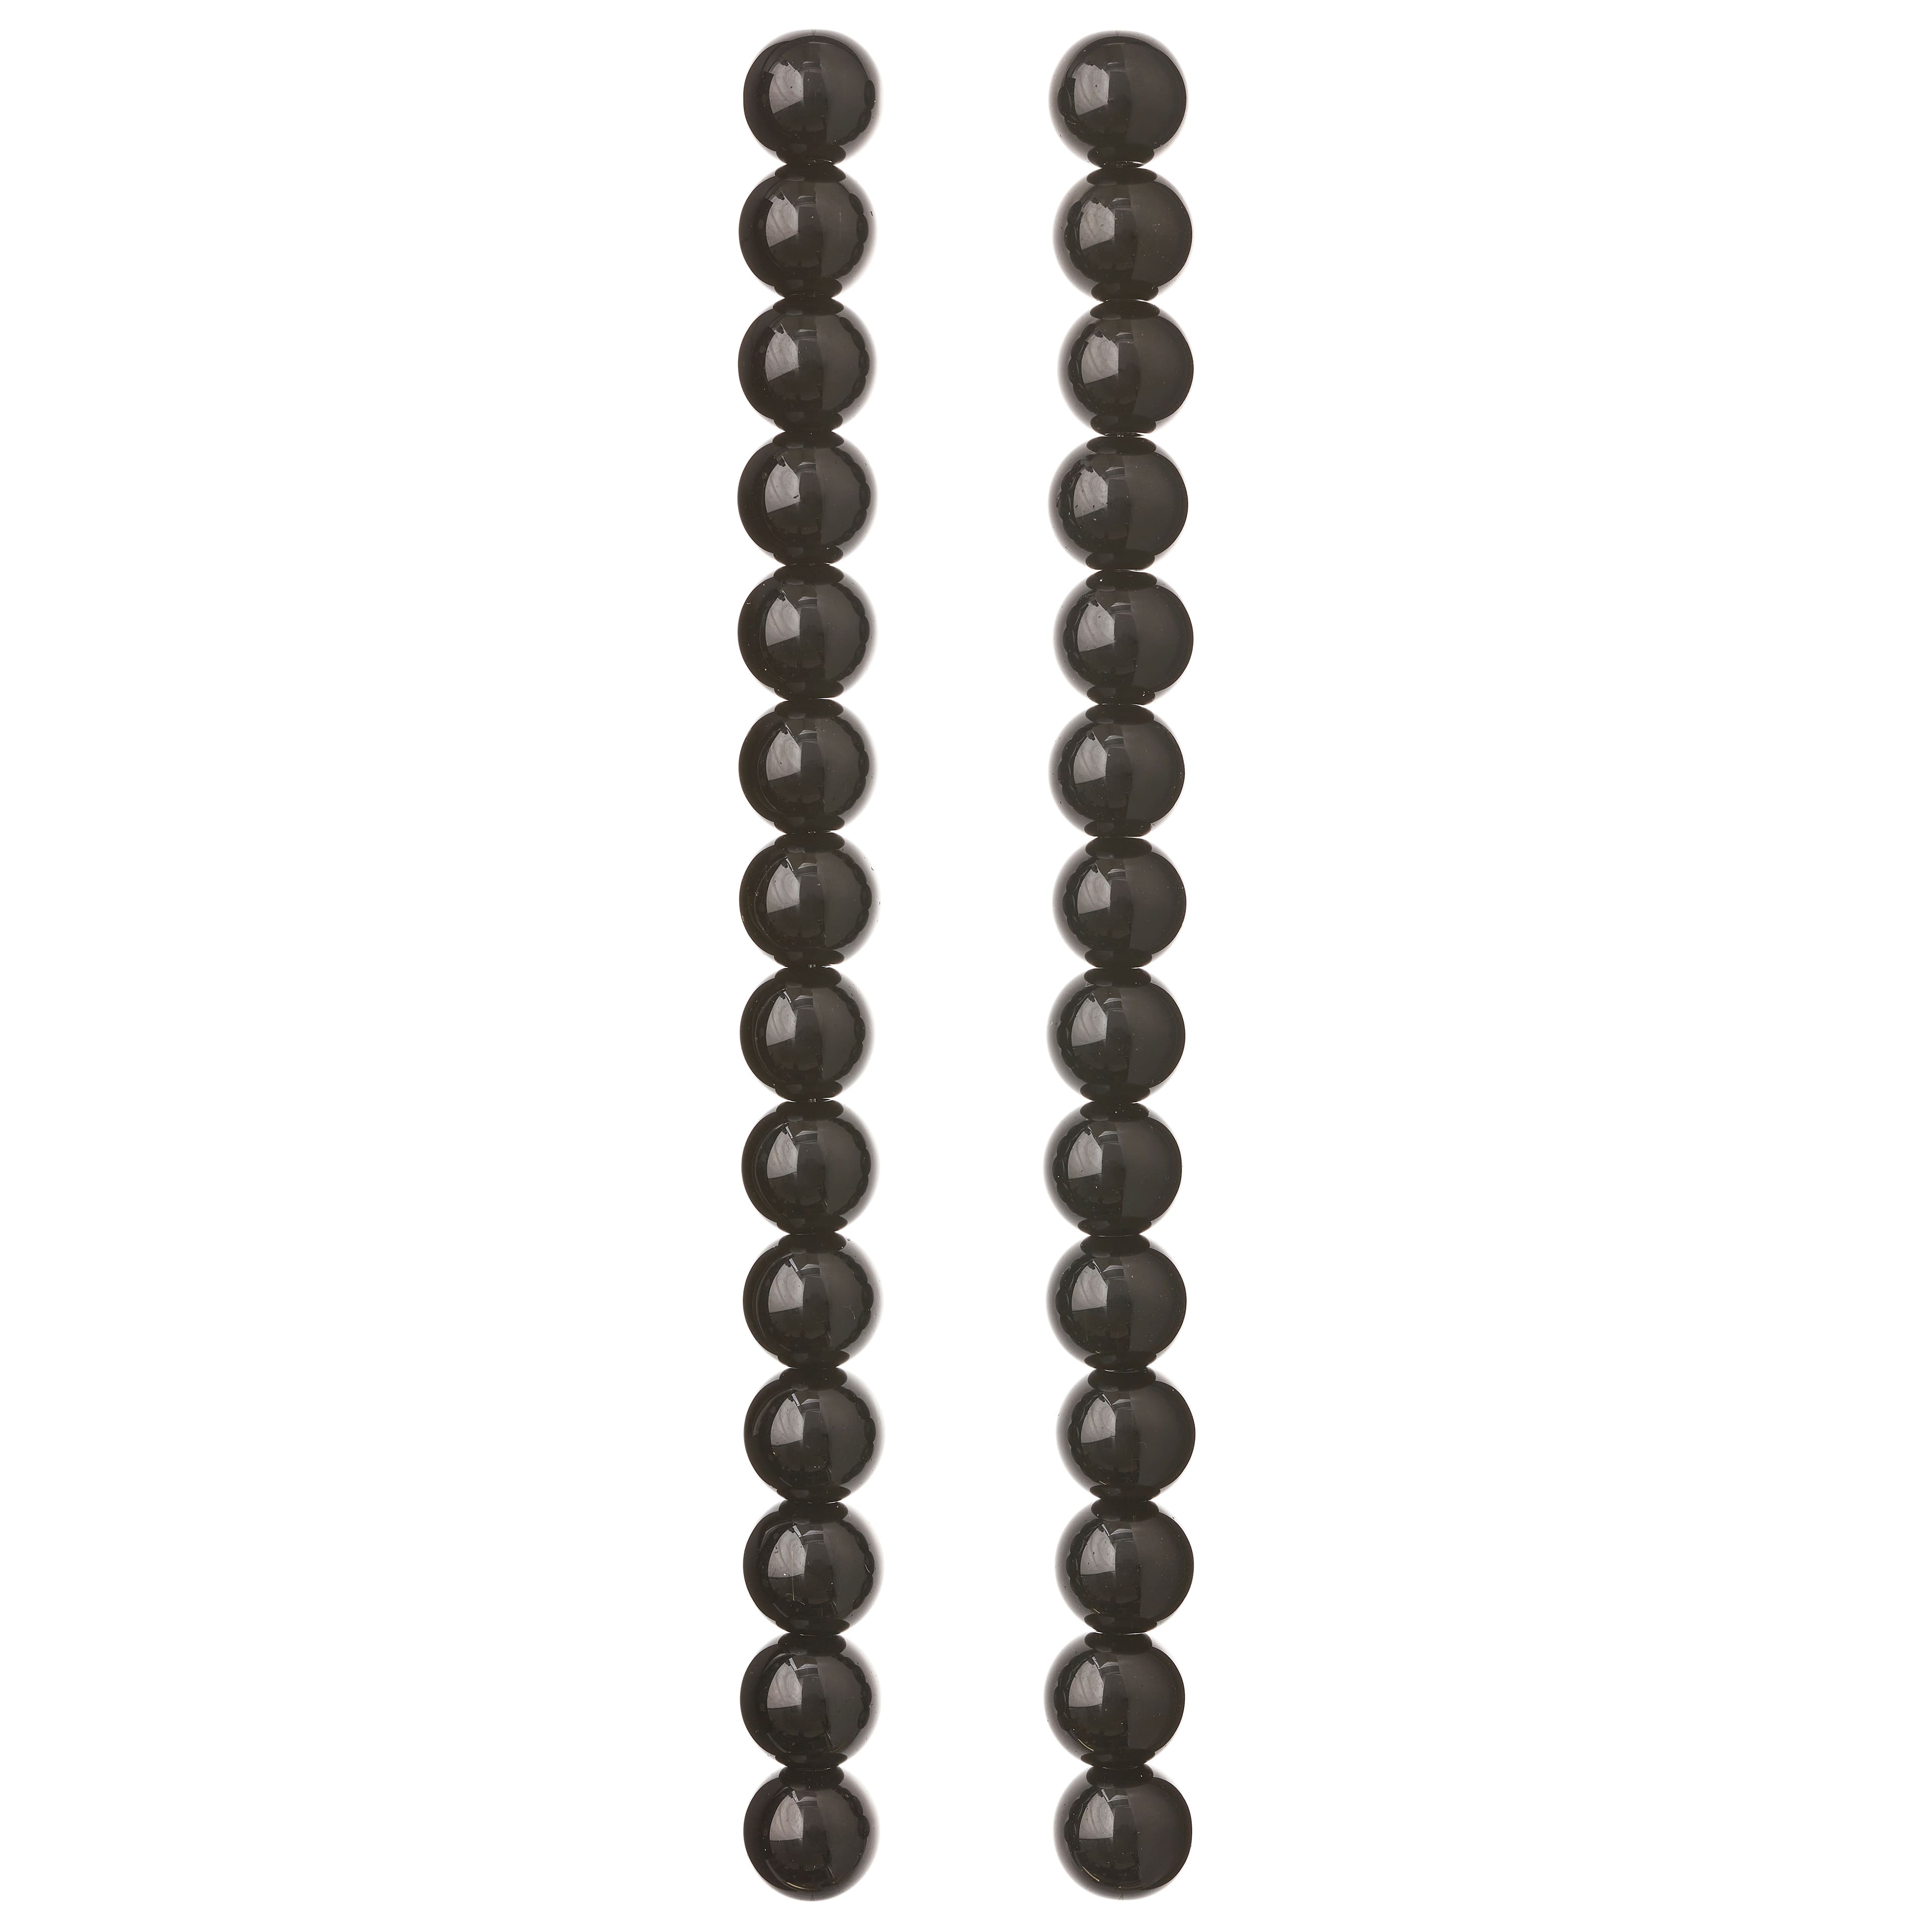 12 Packs: 26 ct. (312 total) Black Glass Round Beads, 10mm by Bead Landing&#x2122;